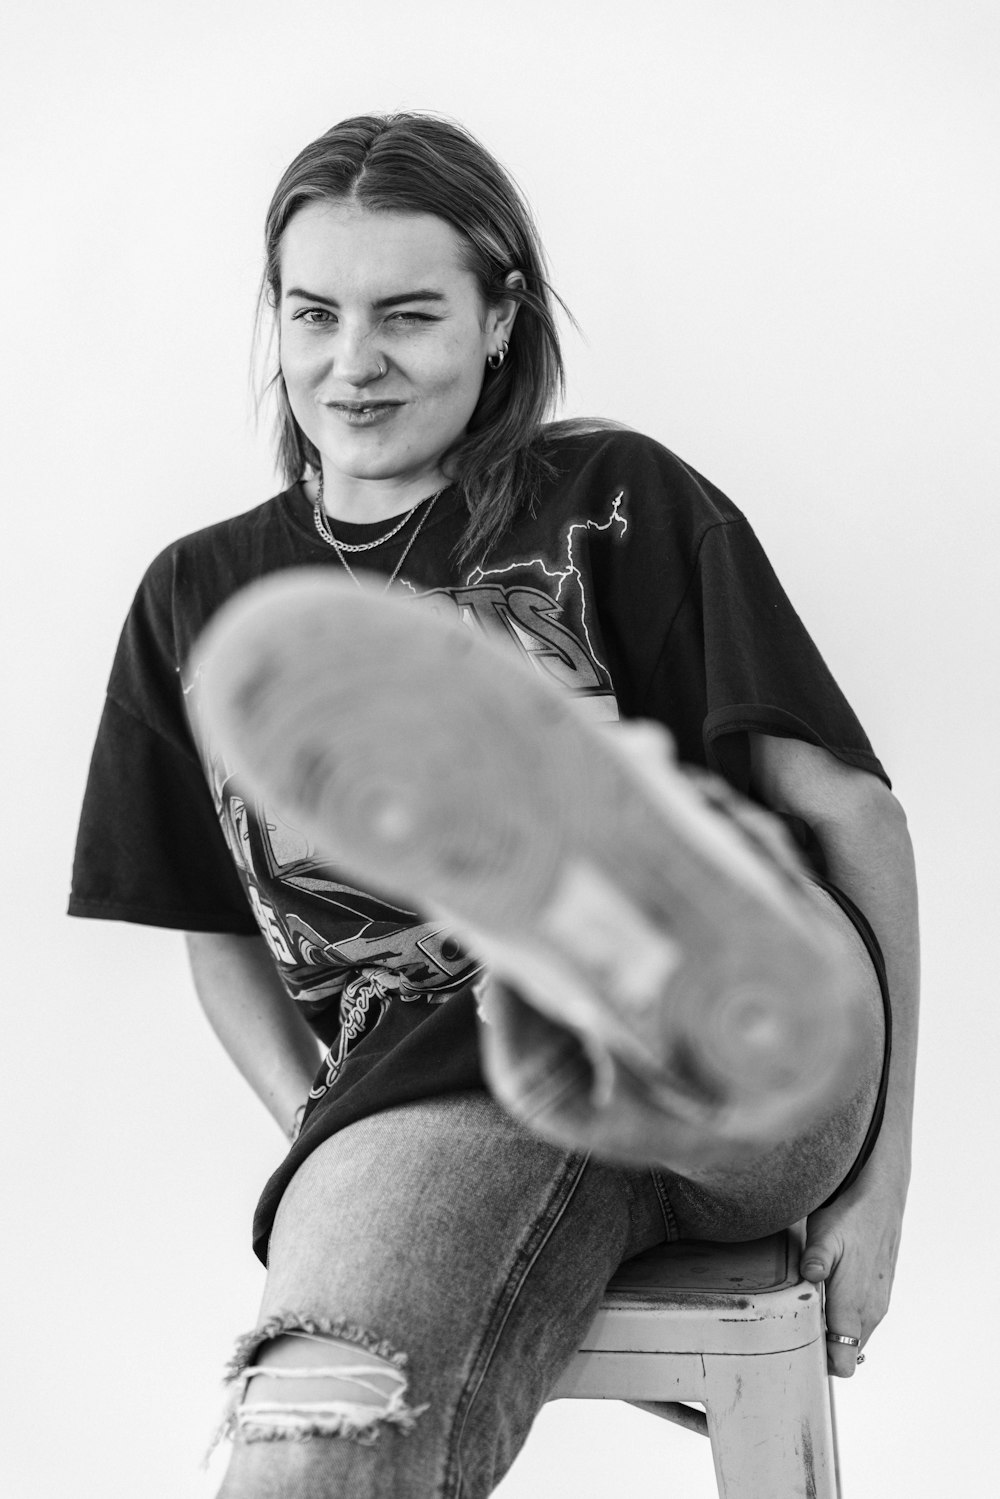 a woman sitting on a stool holding a skateboard